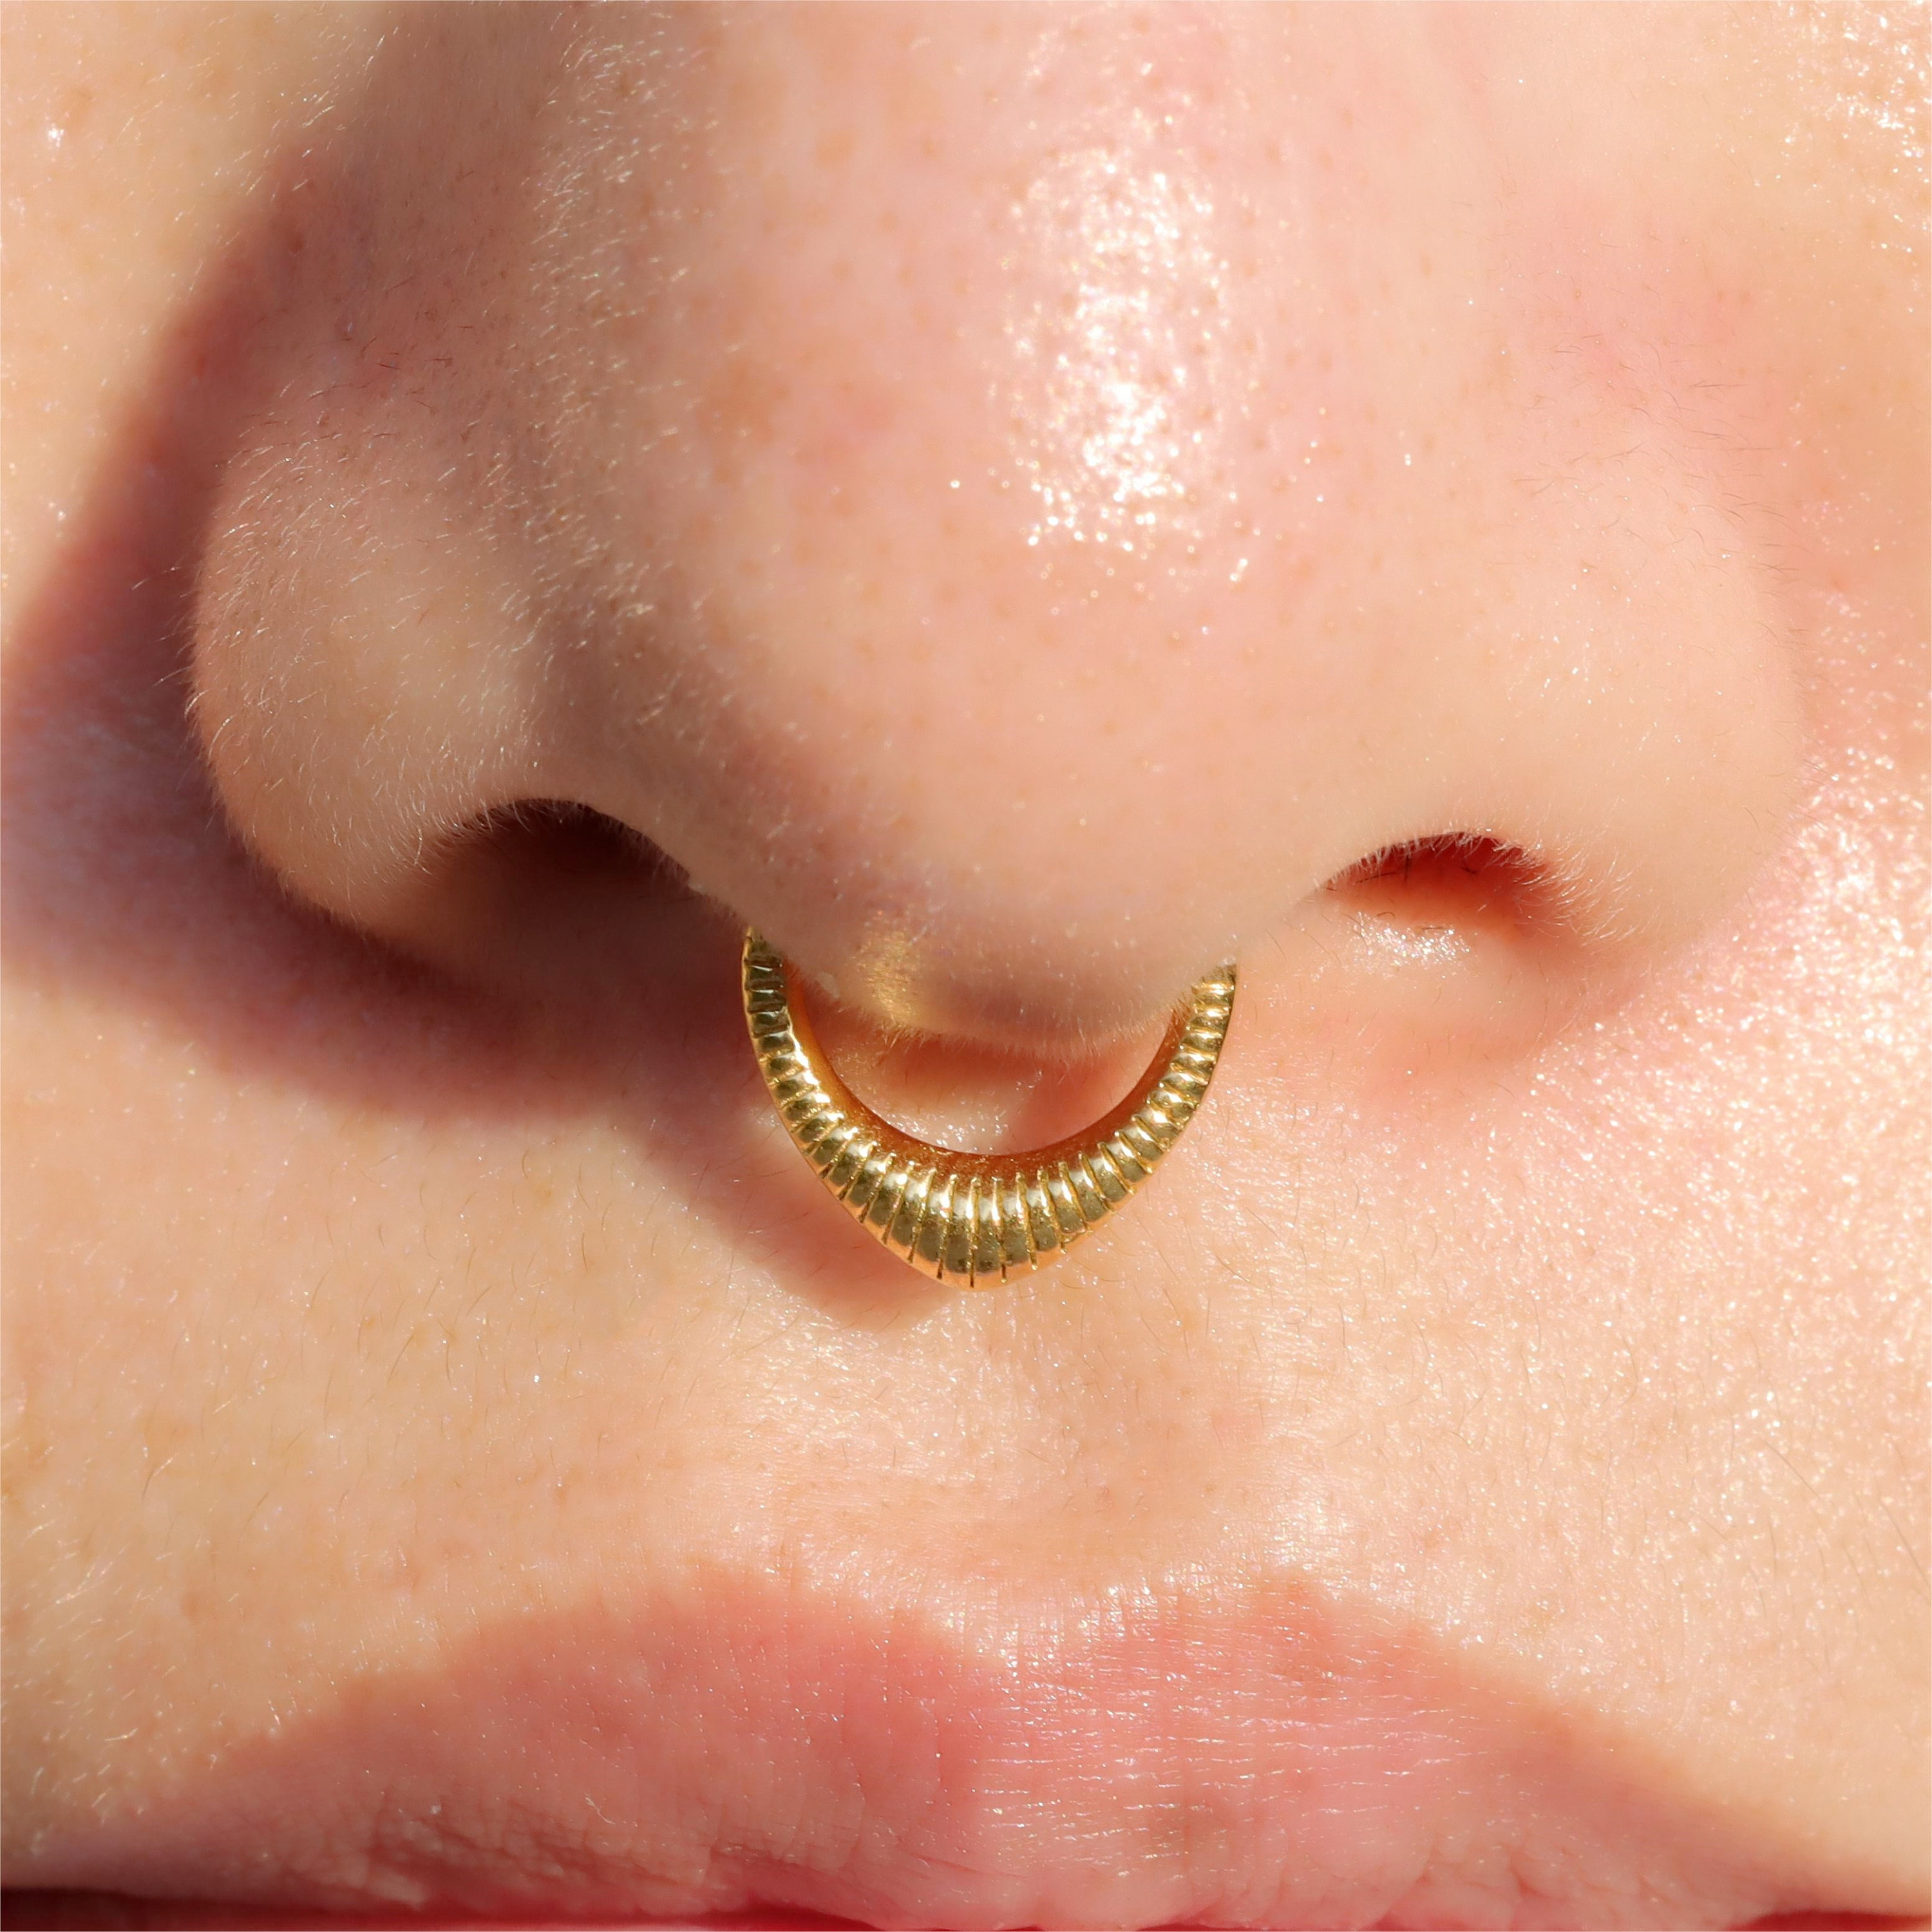 Stainless Steel Fake Nose Ring Clip On Septum Piercing Faux Hoop Indian Nose  Ring Pircing Nose Punk Body Piercing Jewelry From Lashion, $2.08 |  DHgate.Com